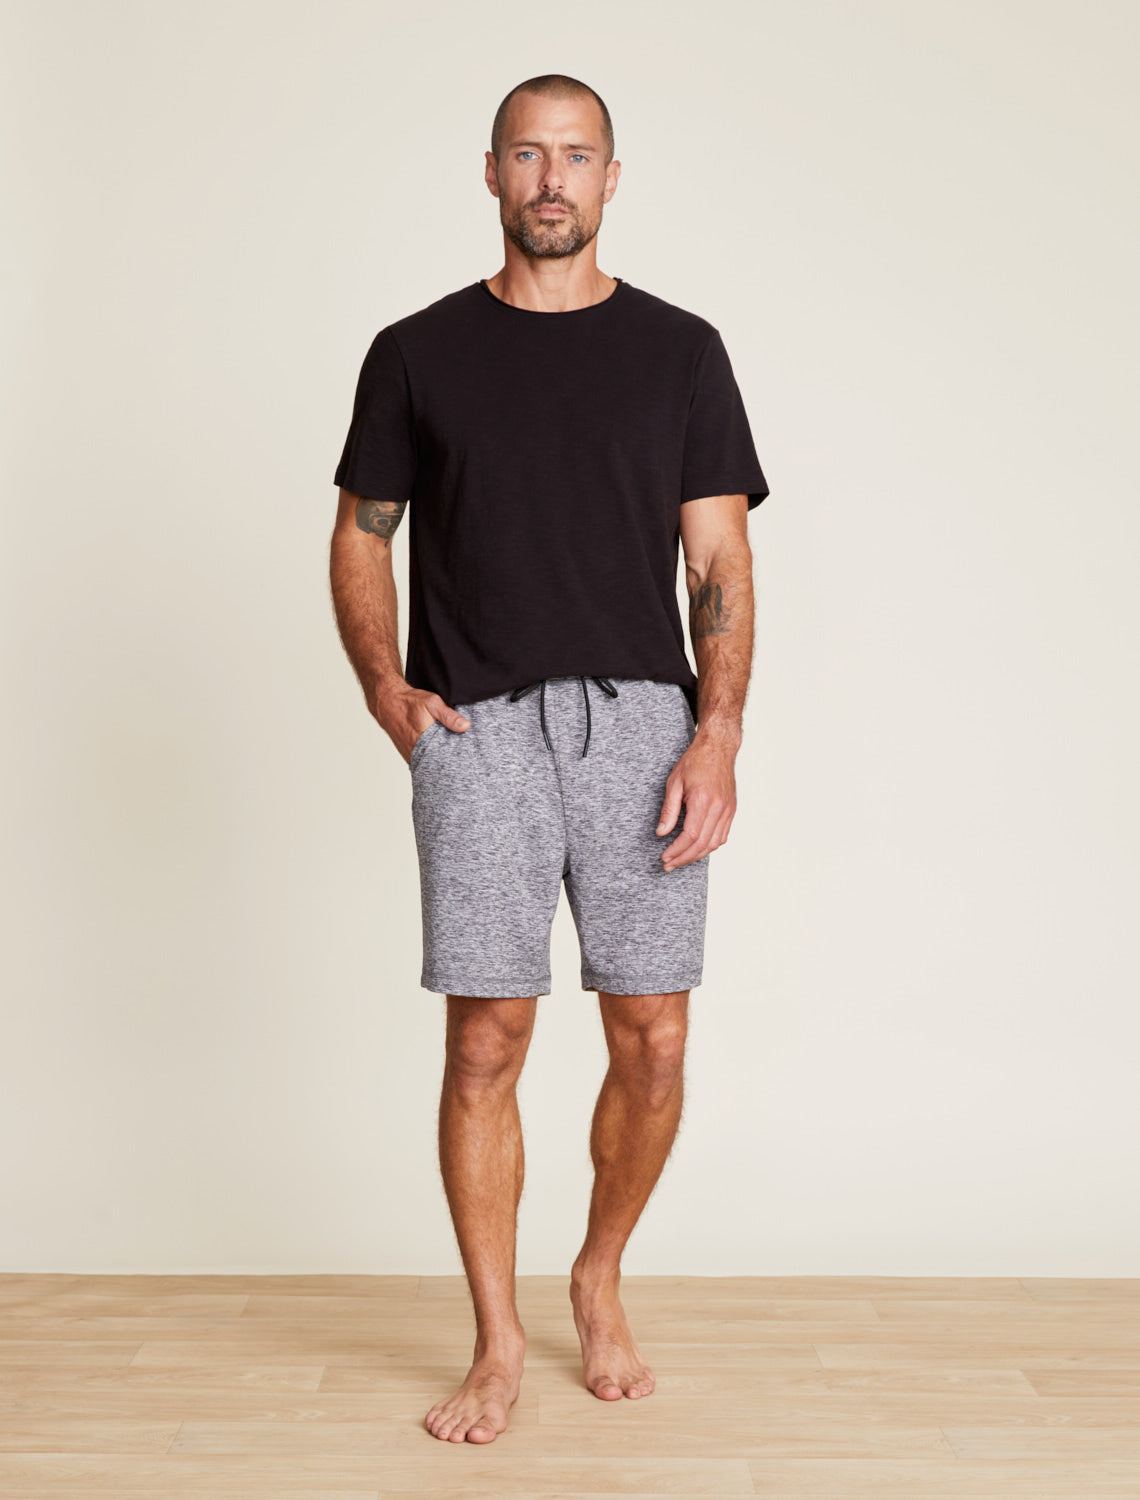 Casual, Comfortable Lounge Shorts for Men   Barefoot Dreams